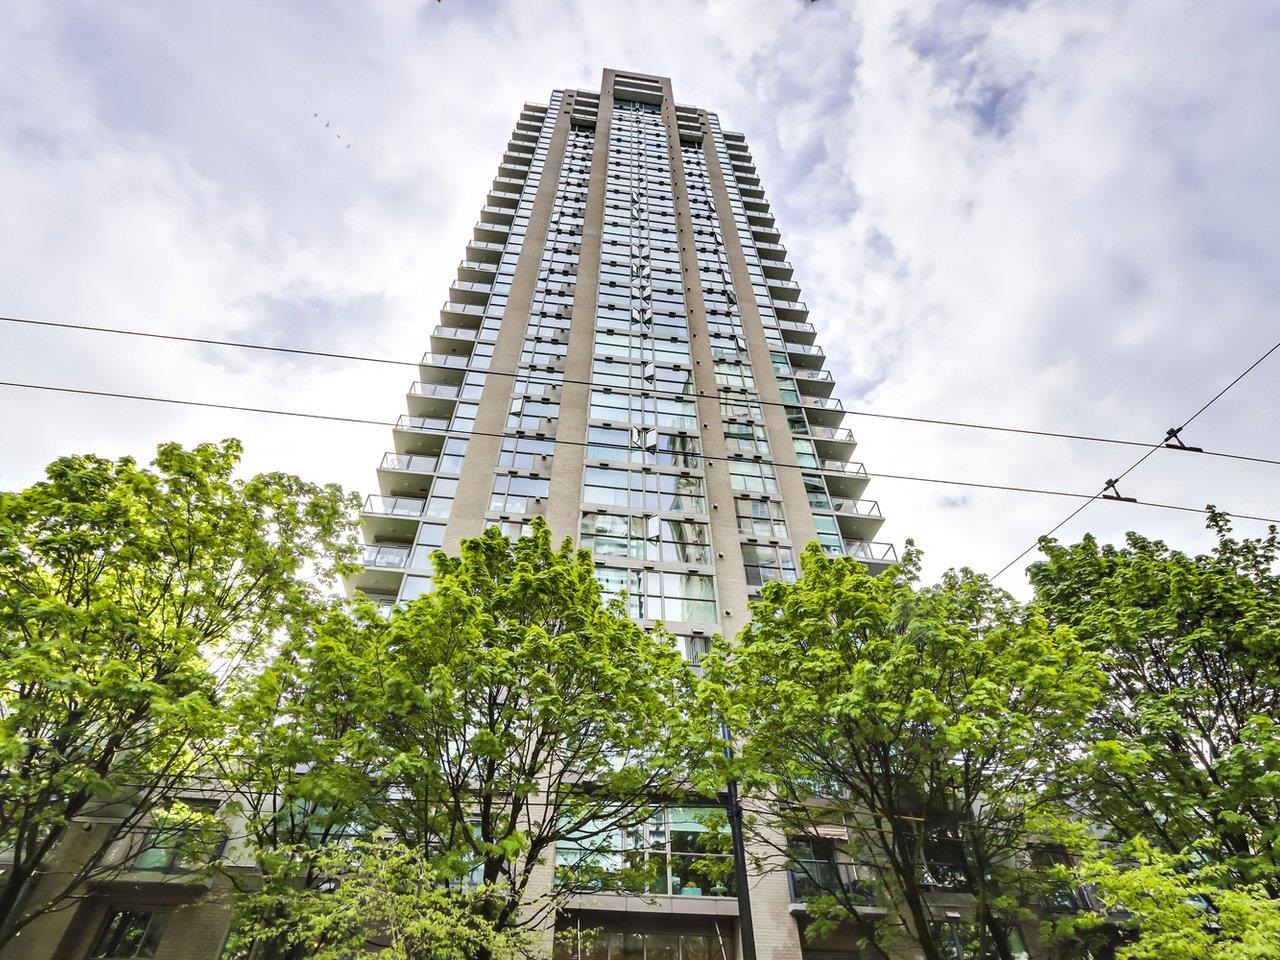 Yaletown Apartment: The Savoy 1 bedroom